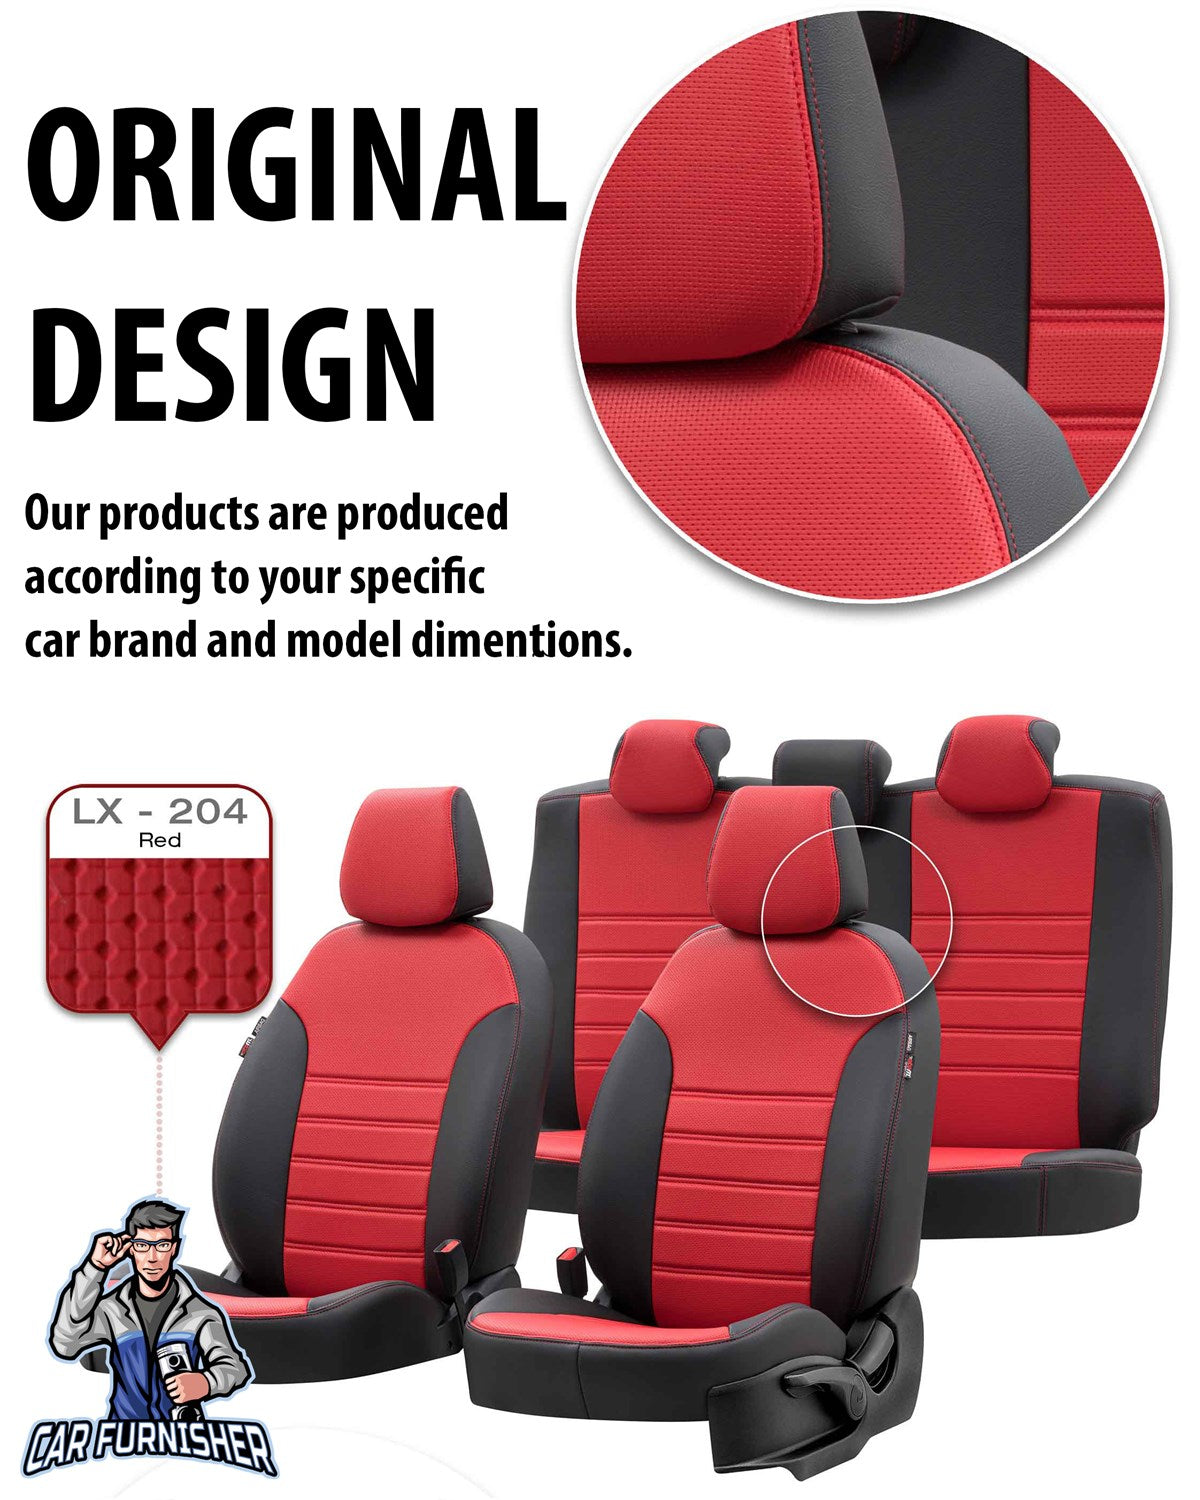 Citroen Jumpy Seat Covers New York Leather Design Beige Leather